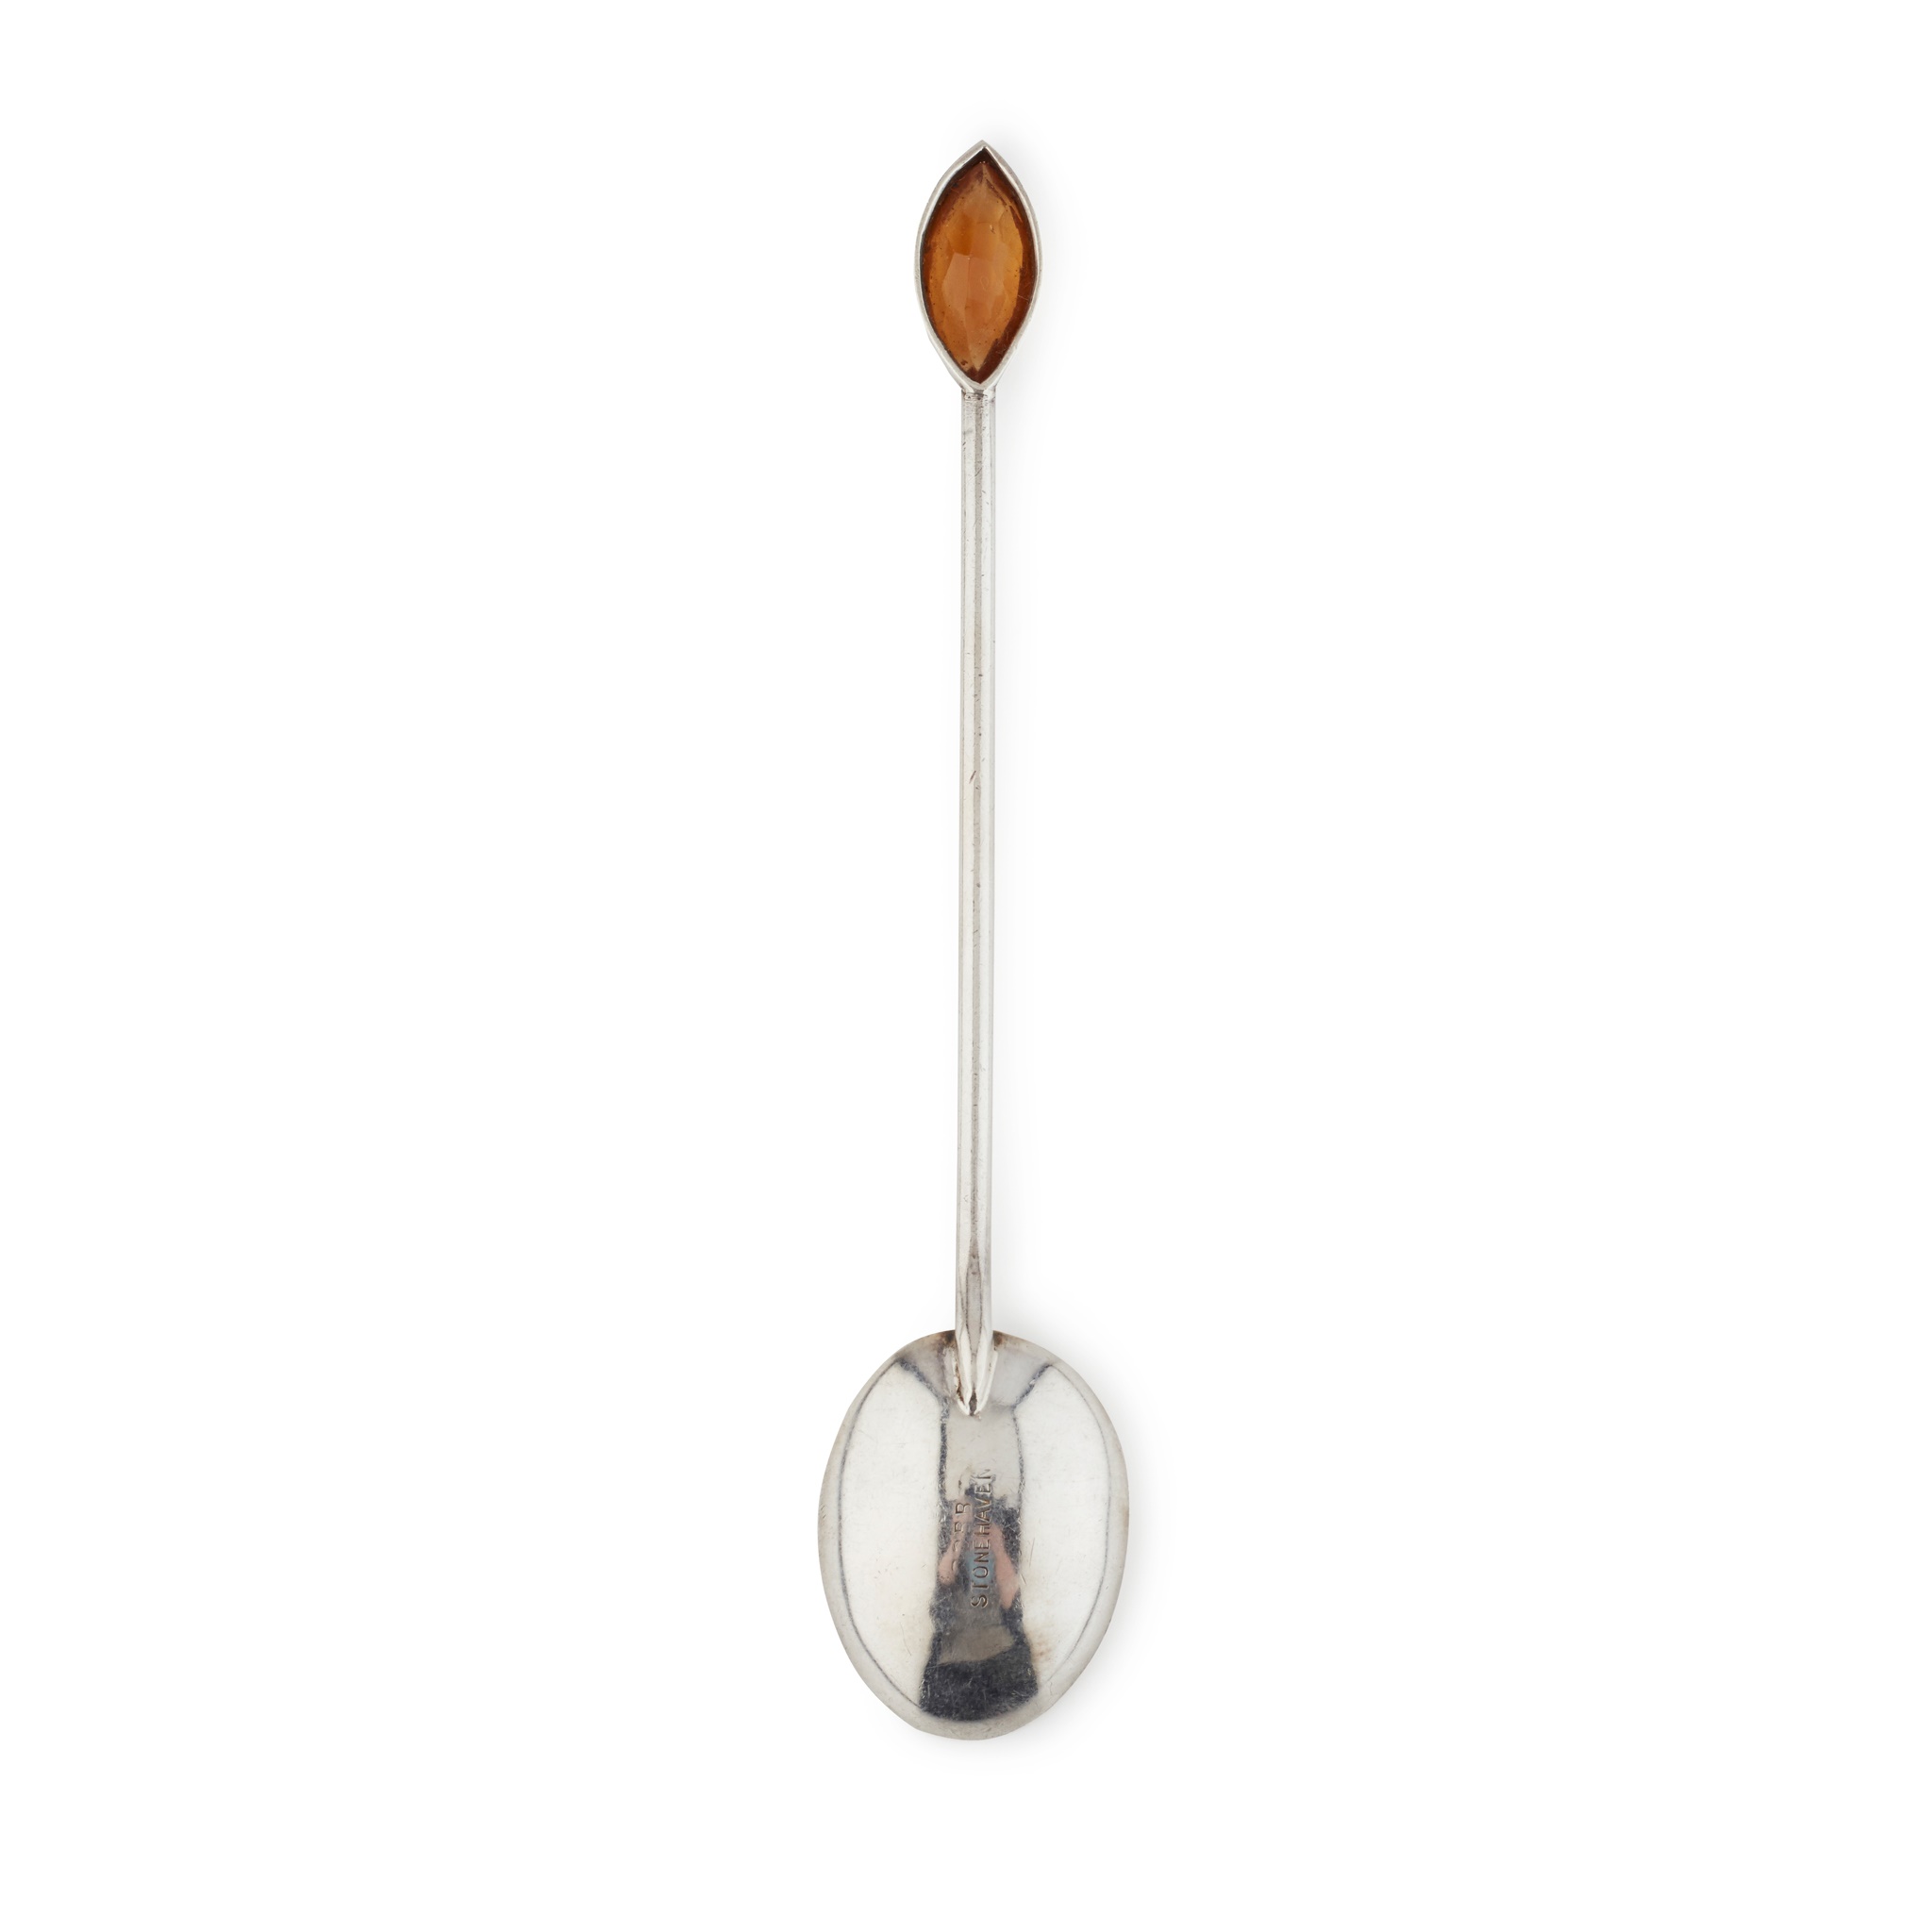 STONEHAVEN – A SCARCE SCOTTISH PROVINCIAL COFFEE SPOON JOHN ROBB - Image 2 of 3